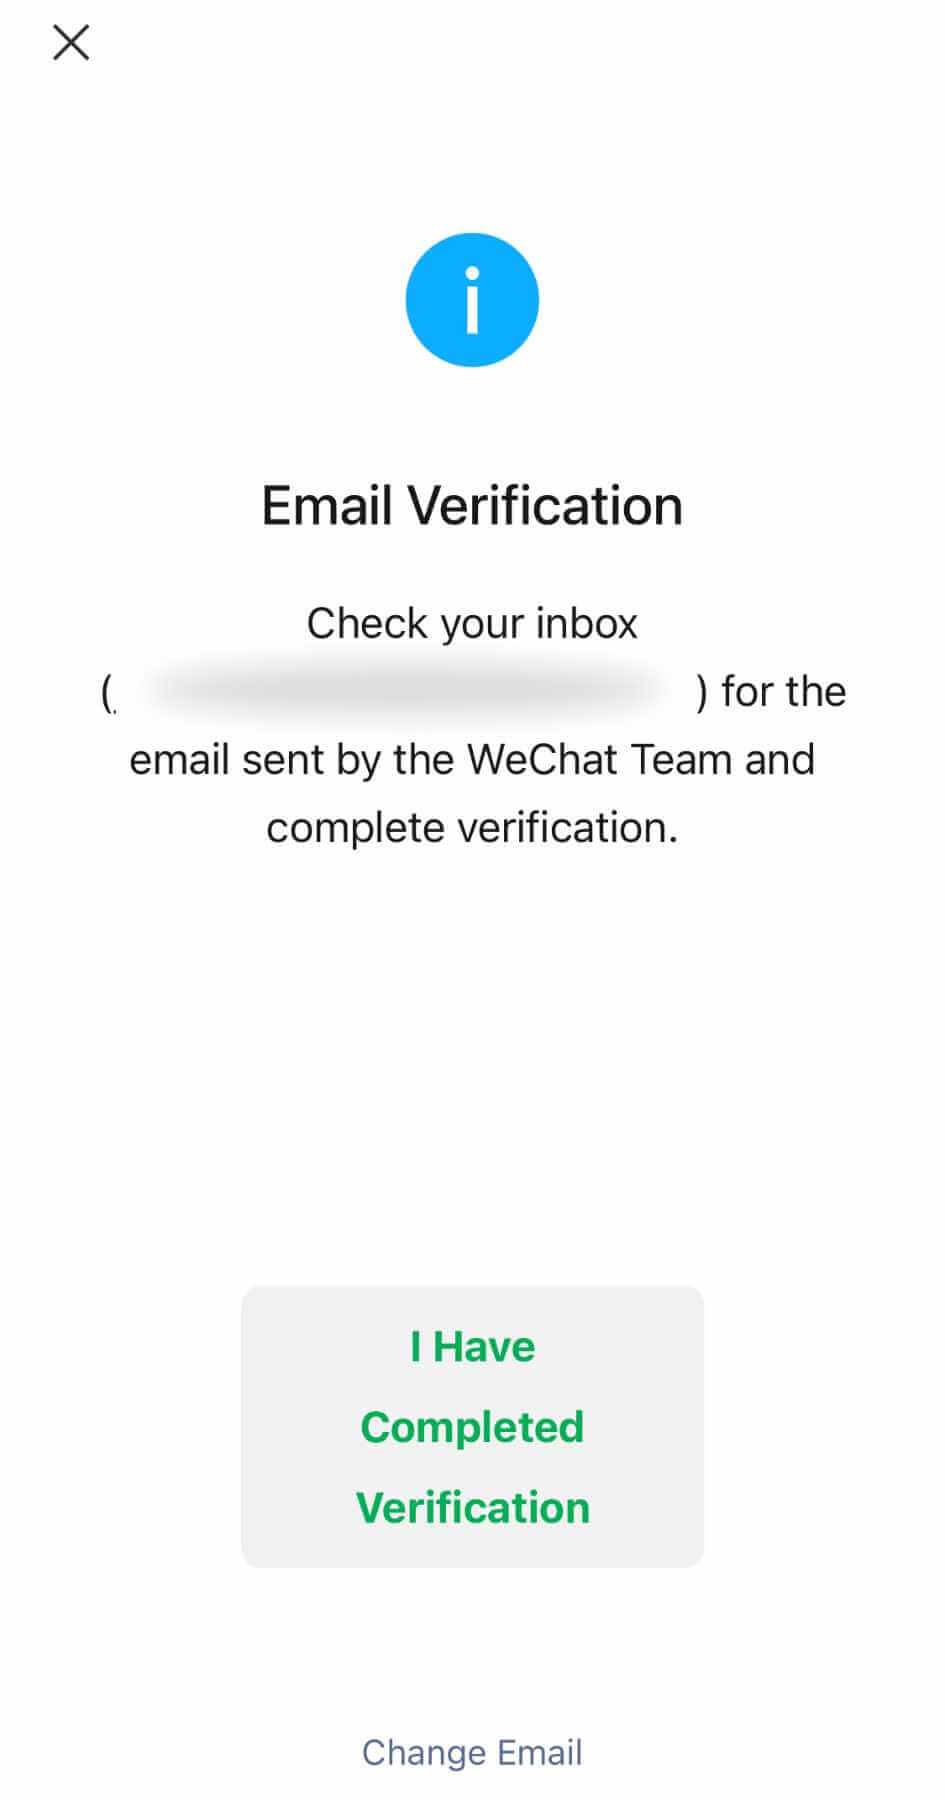 email verification completed